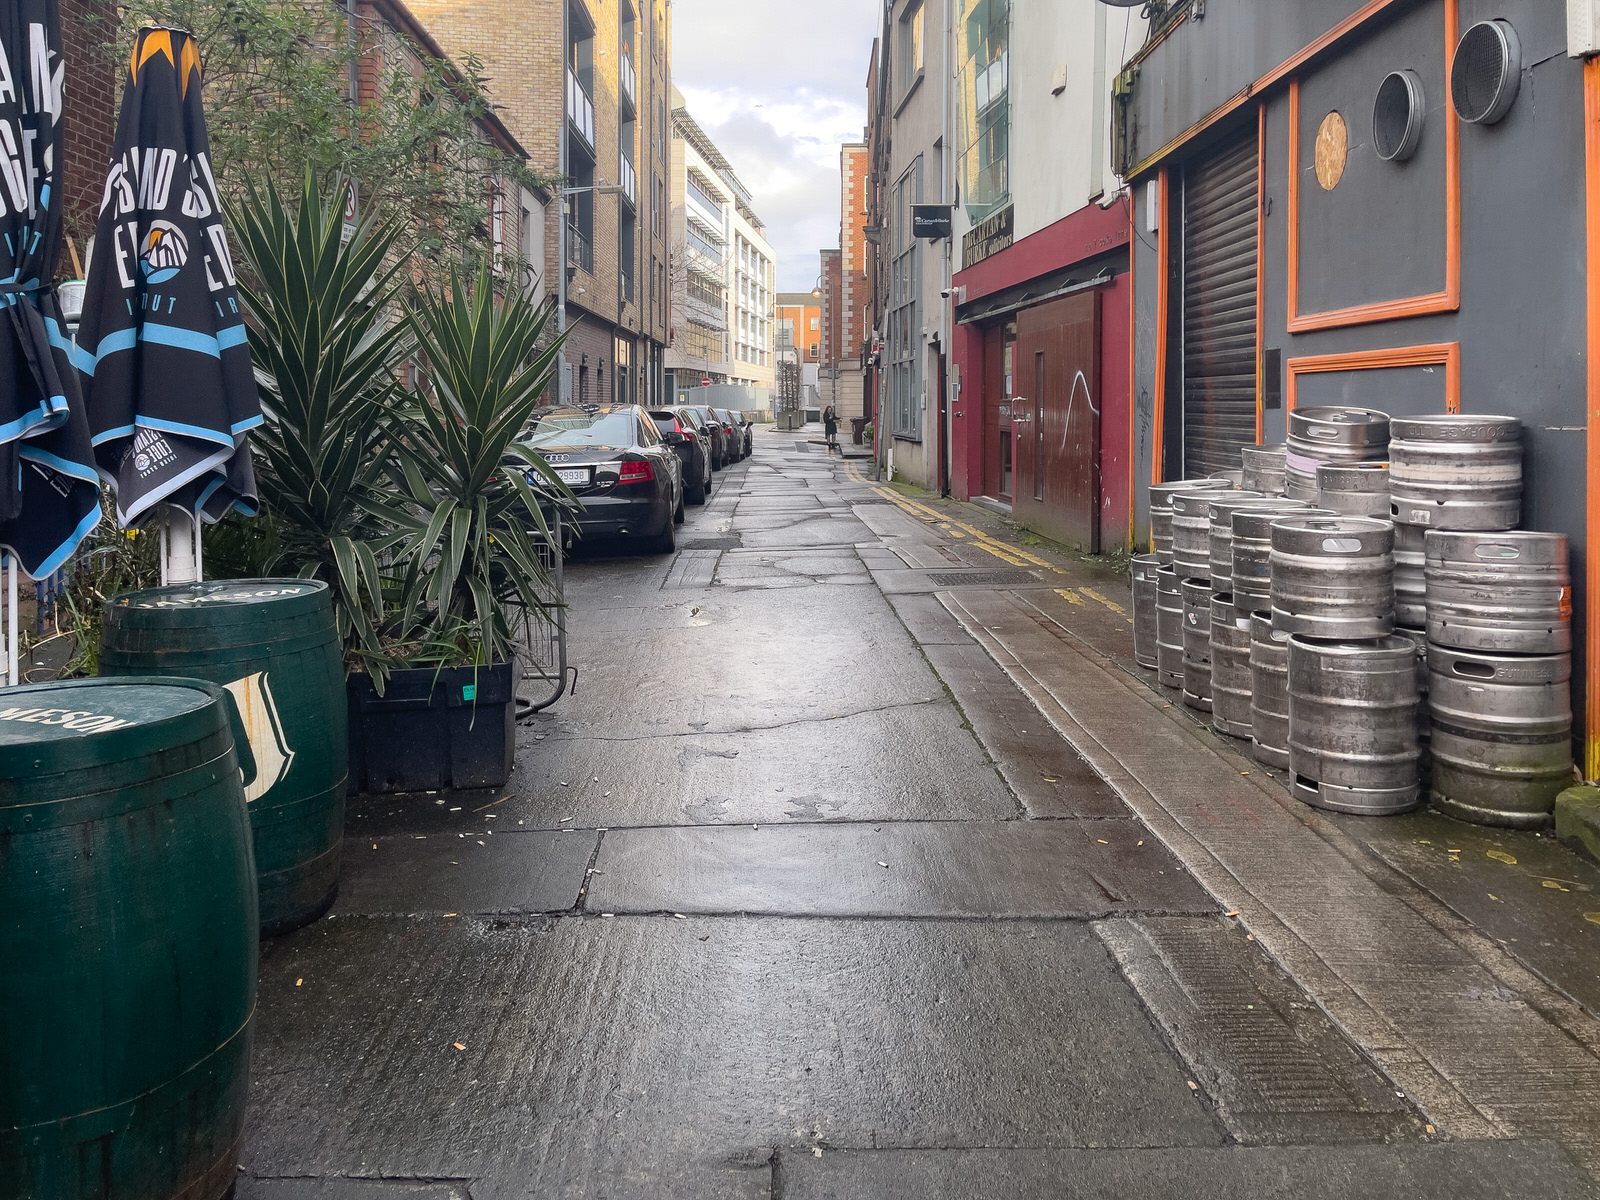 ANOTHER VISIT TO COKE LANE [SMITHFIELD AREA OF DUBLIN]-228141-1